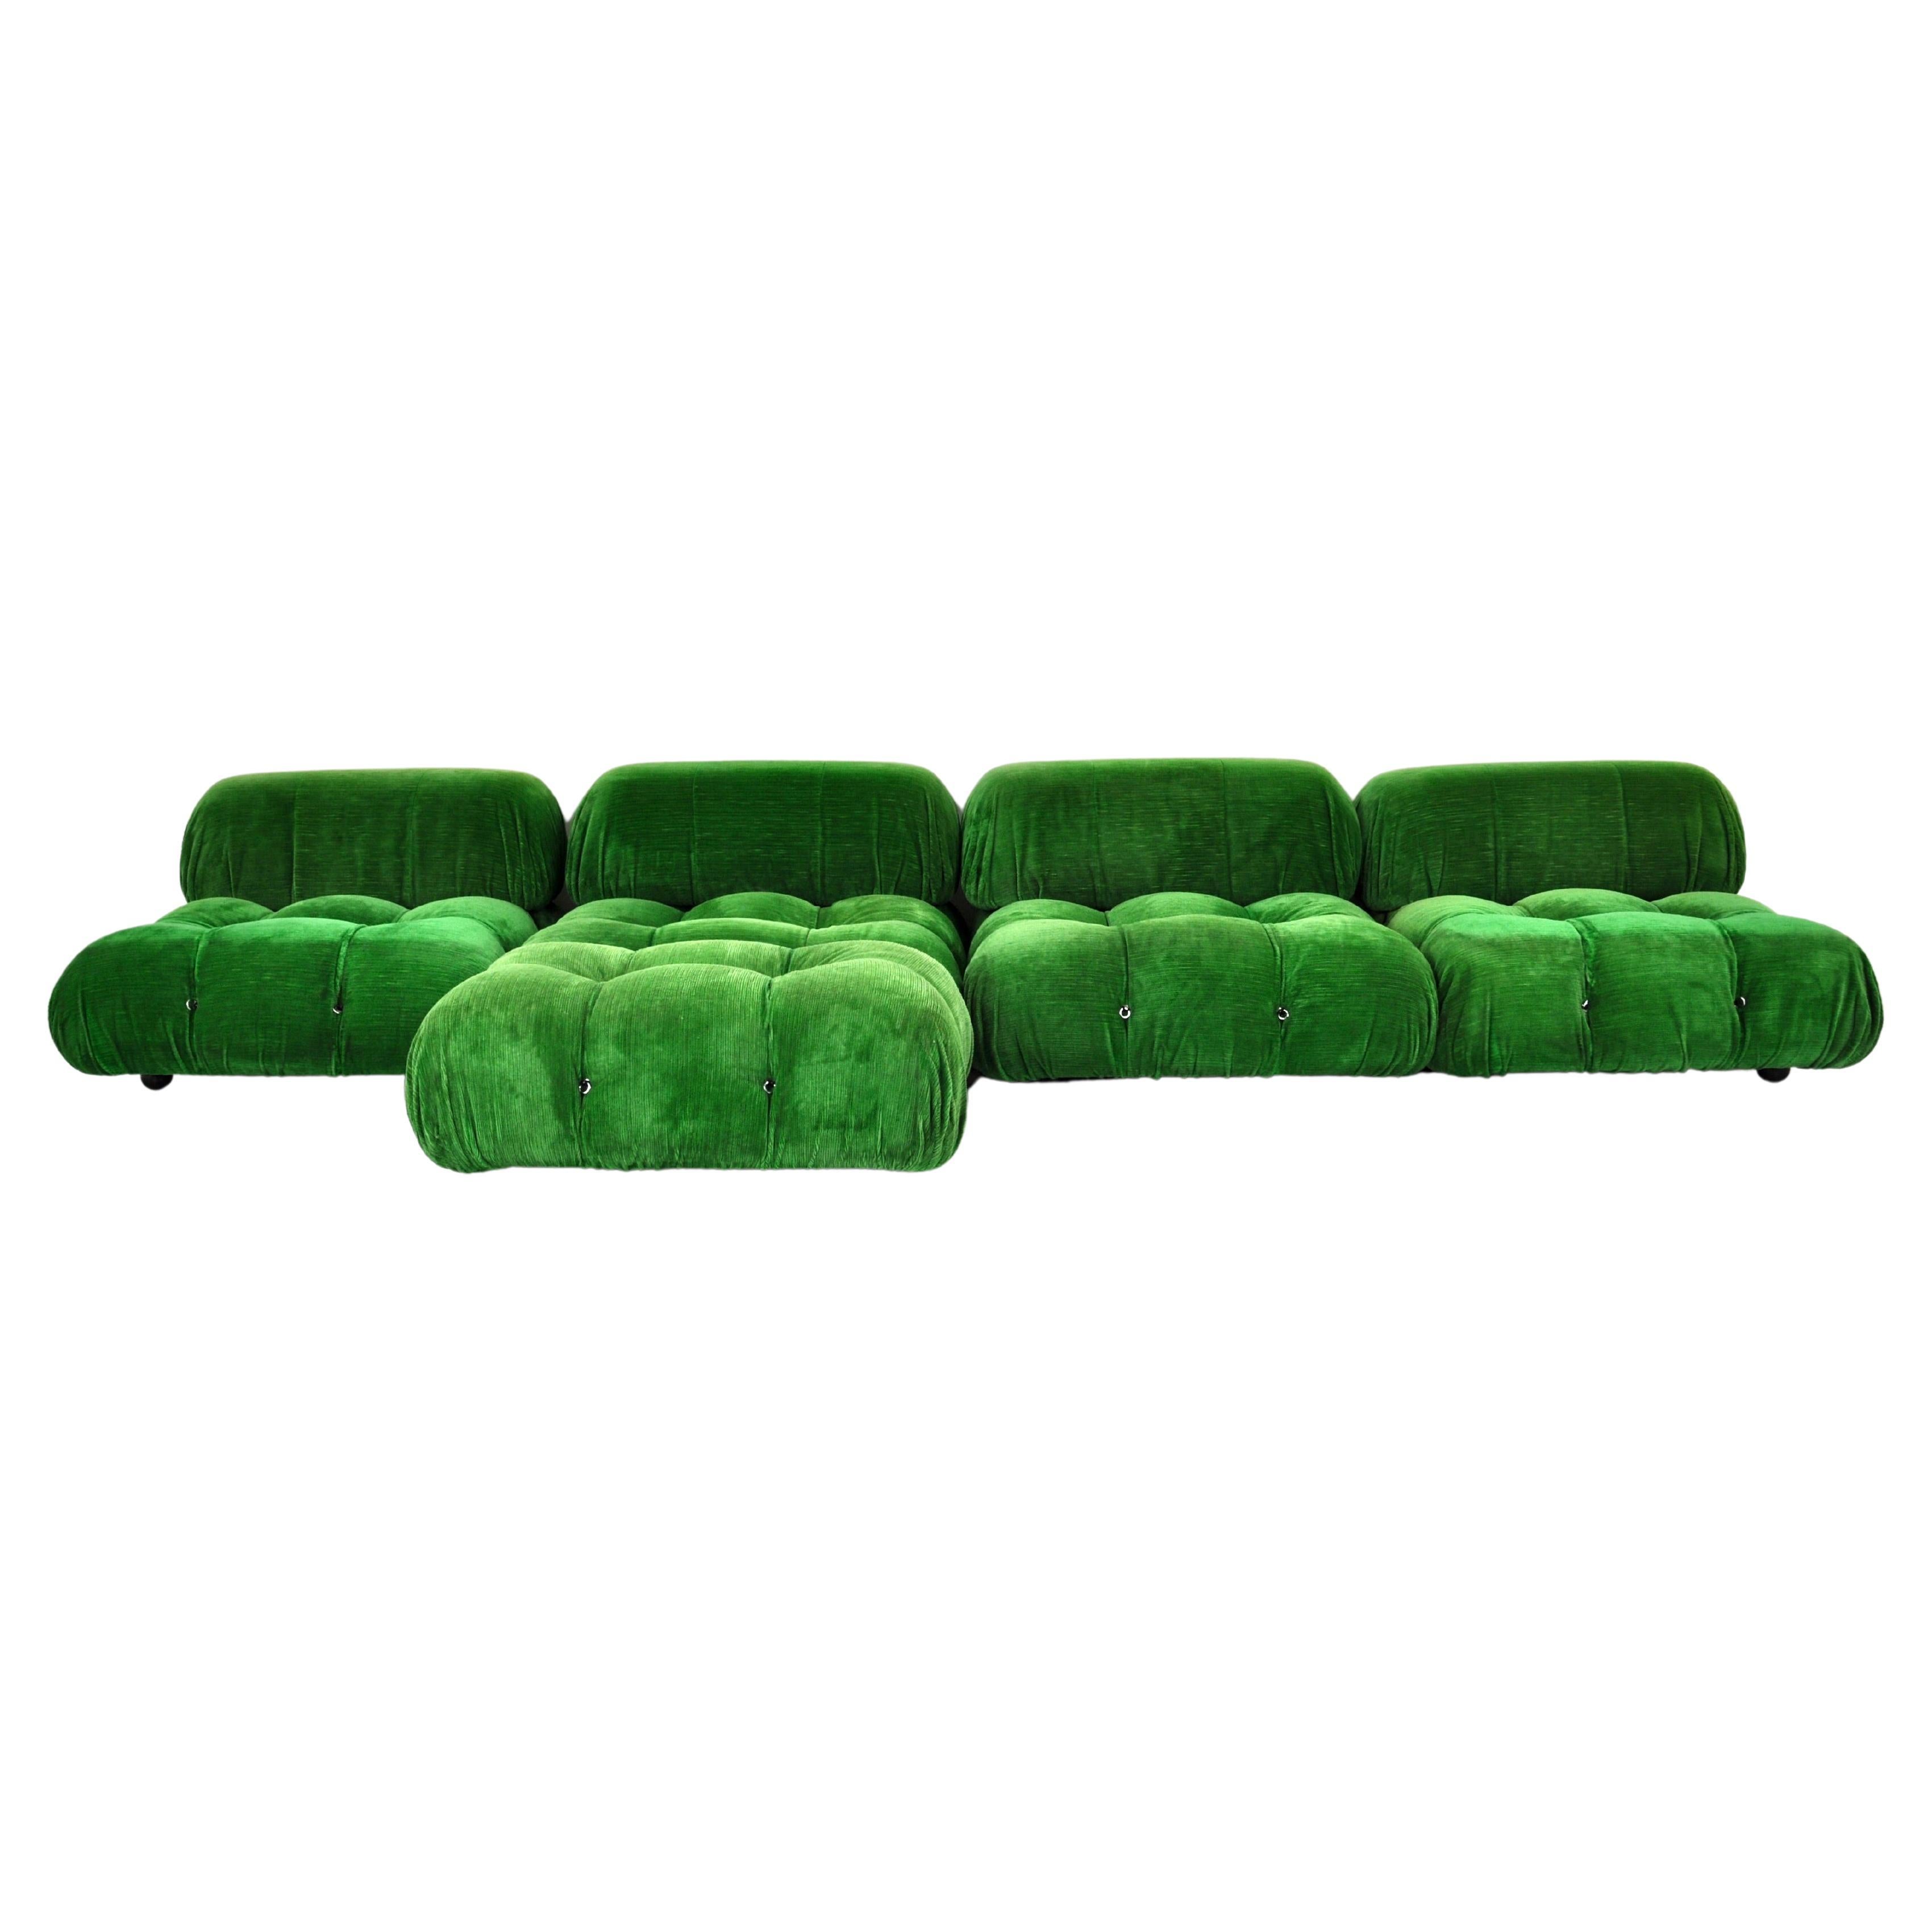 Green velvet sofa. There are 4 large pieces and an ottoman. Seat height: 35 cm. Dimensions of one piece: H: 67 W: 94 cm D: 94 cm
Ottoman dimensions: H: 35 cm W: 94 cm D: 65cm.
Wear due to time and age of the sofa.
Stamped B&B Italia.